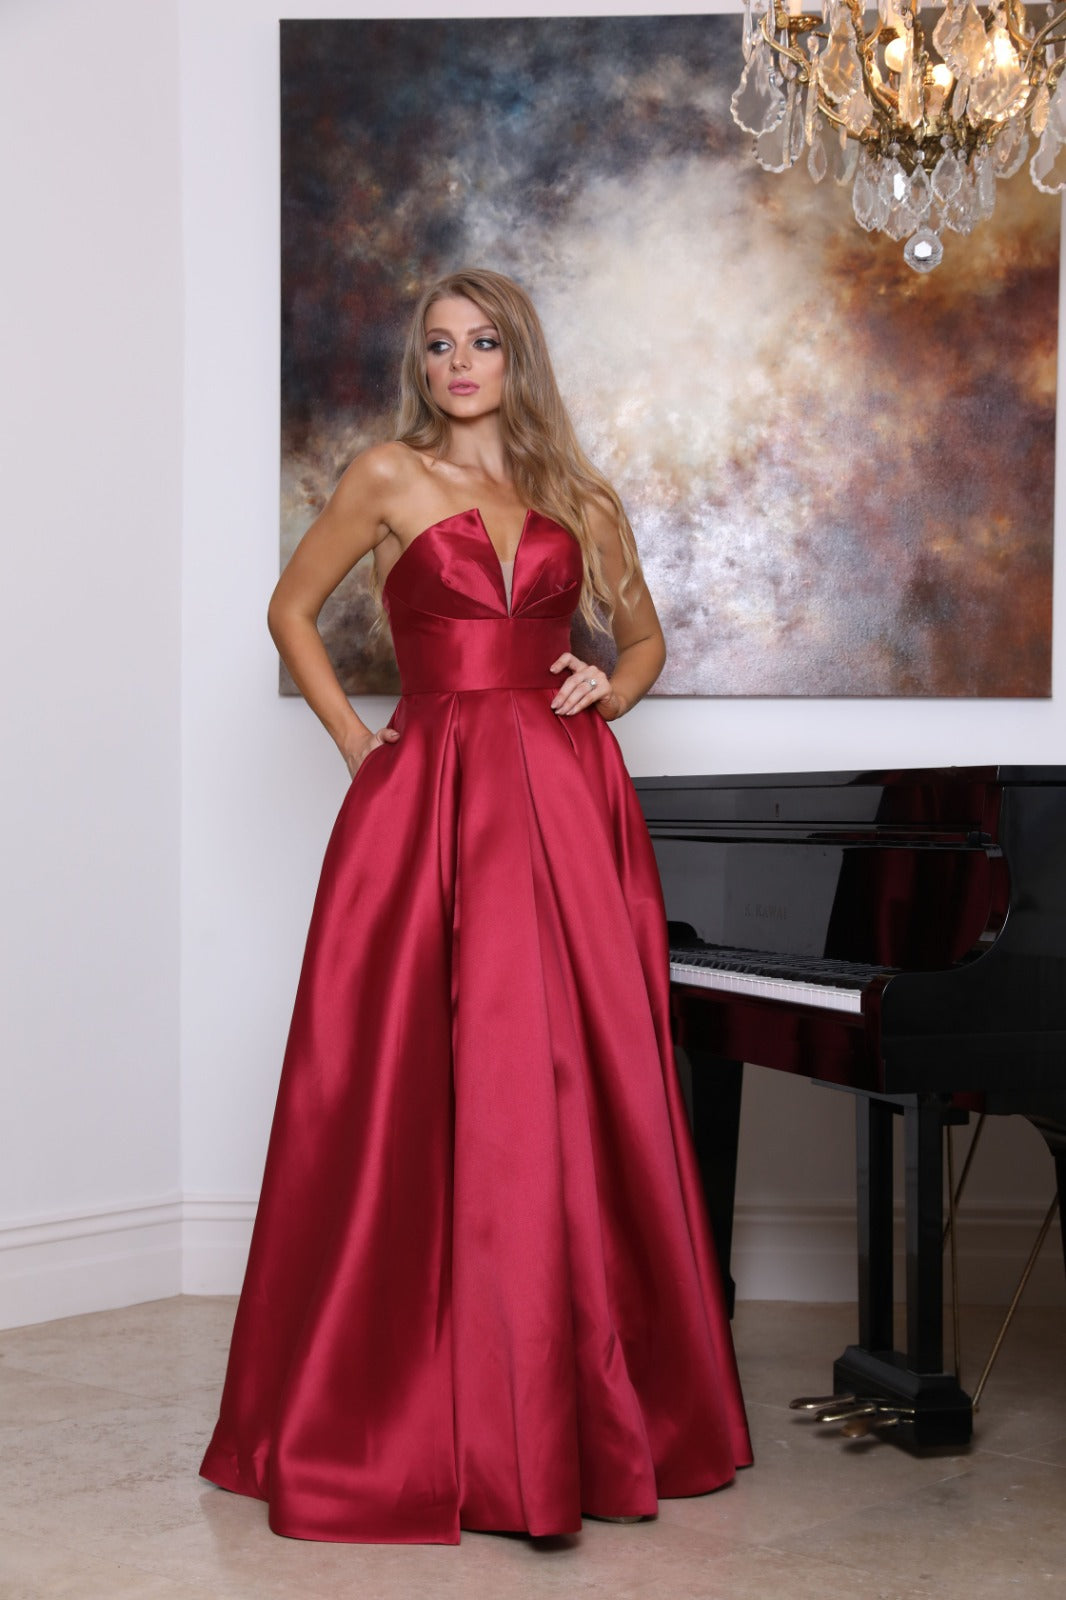 Tinaholy Couture TA611 Wine Strapless Ball Gown Formal Dress Tina Holly Couture$ AfterPay Humm ZipPay LayBuy Sezzle